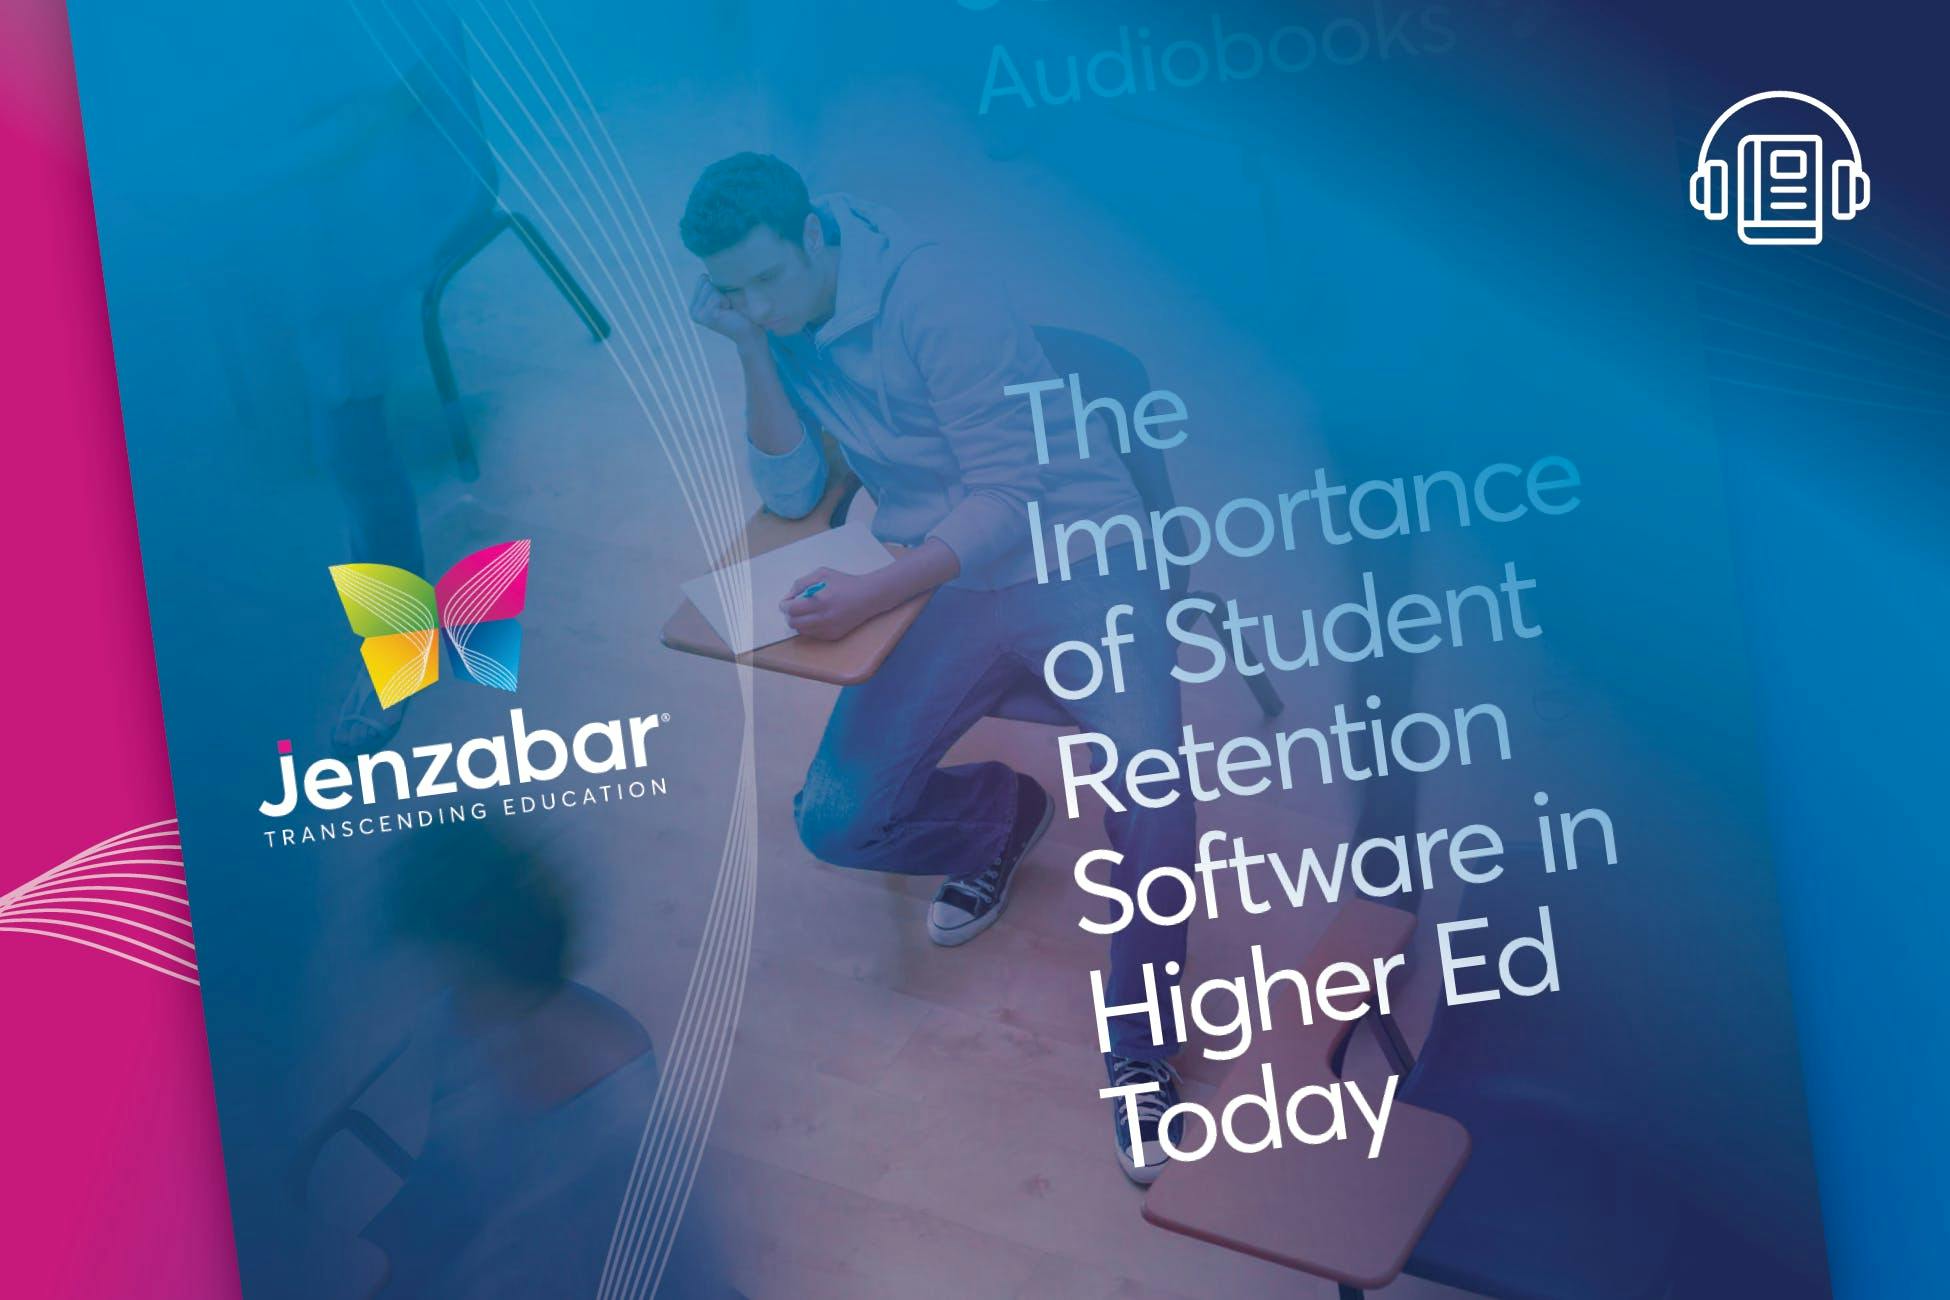 Audiobook: The Importance of Student Retention Software in Higher Ed Today